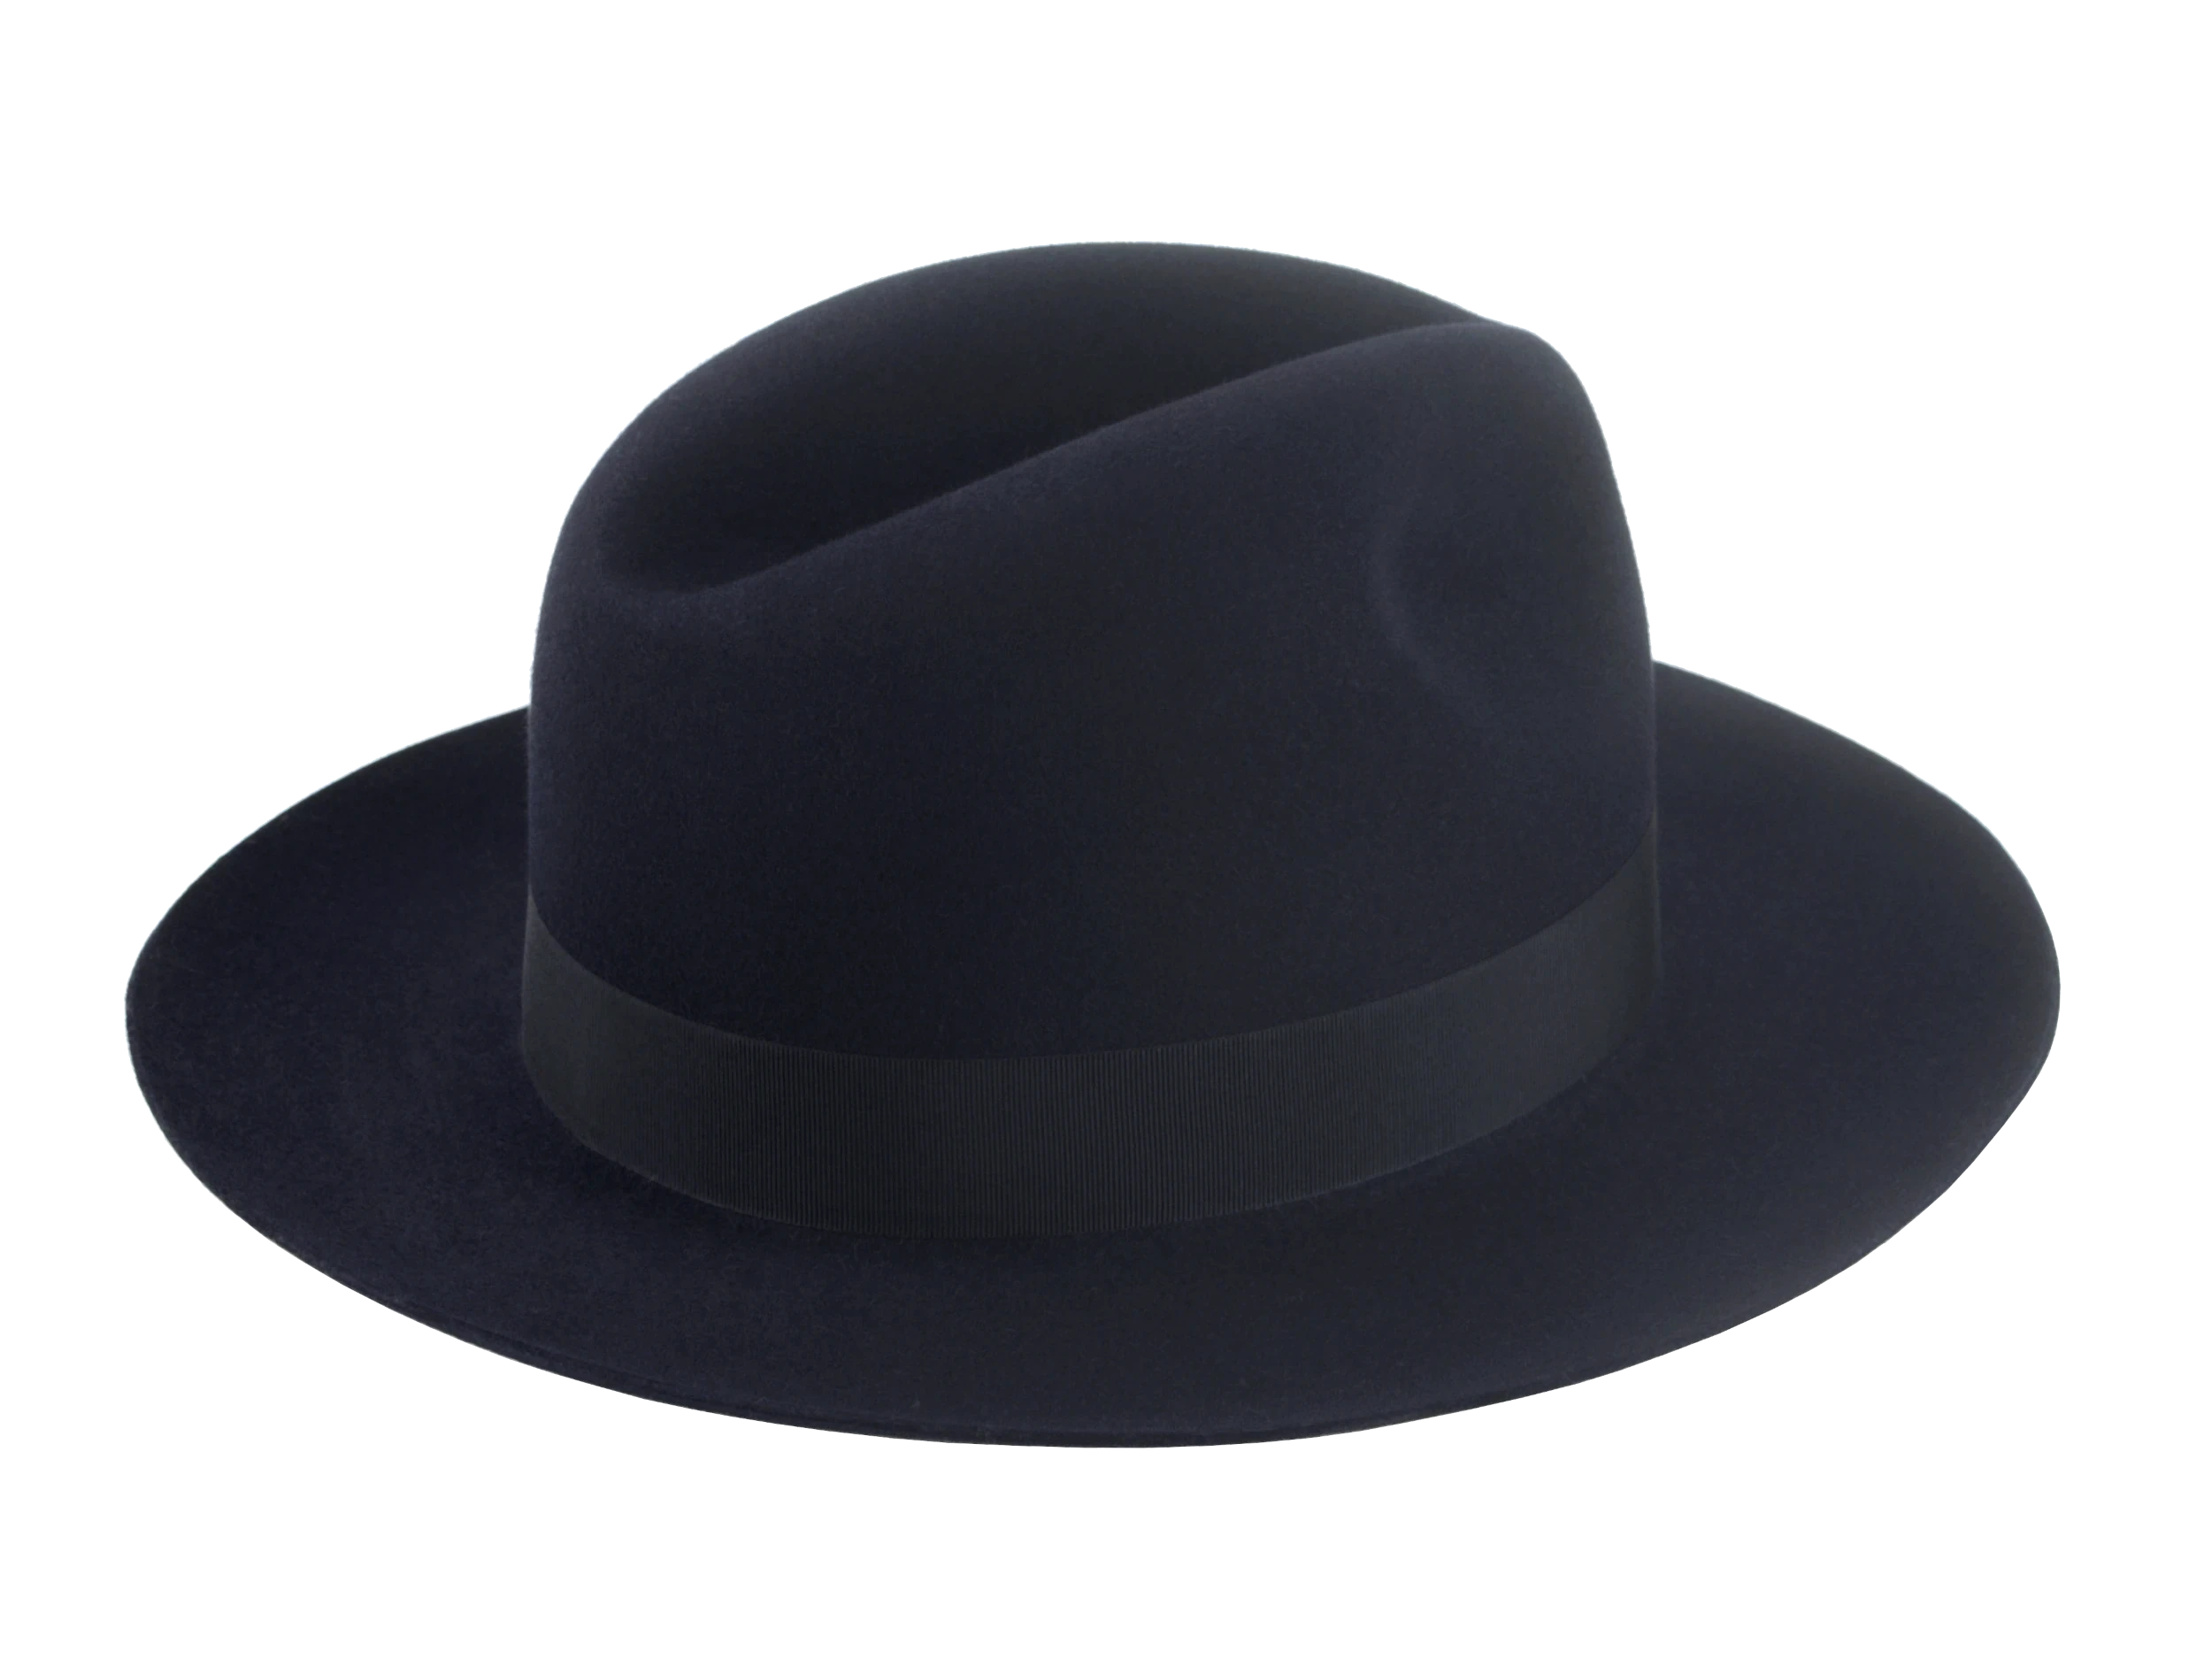 The Brando: Rear view focusing on the craftsmanship of the fedora's silhouette | Agnoulita Hats